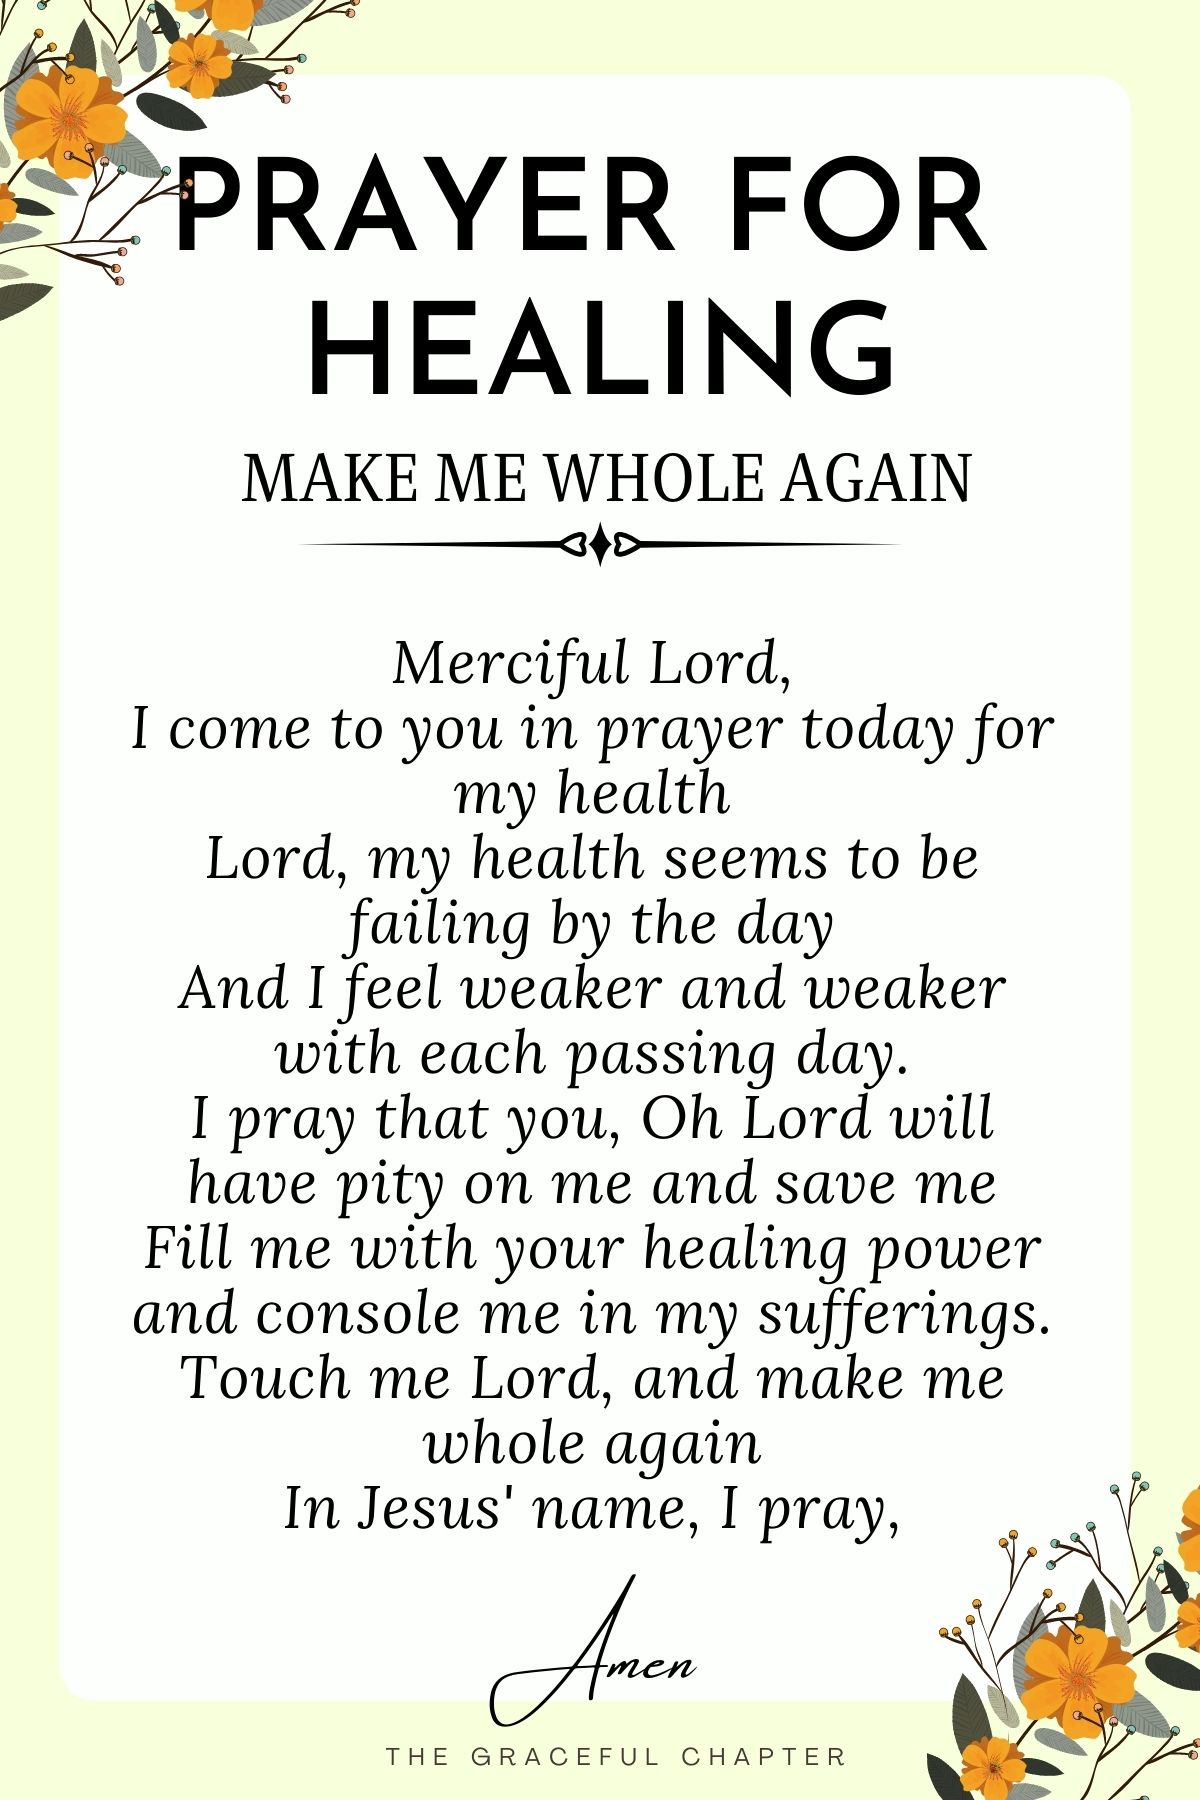 20 Short Prayers For Healing The Graceful Chapter